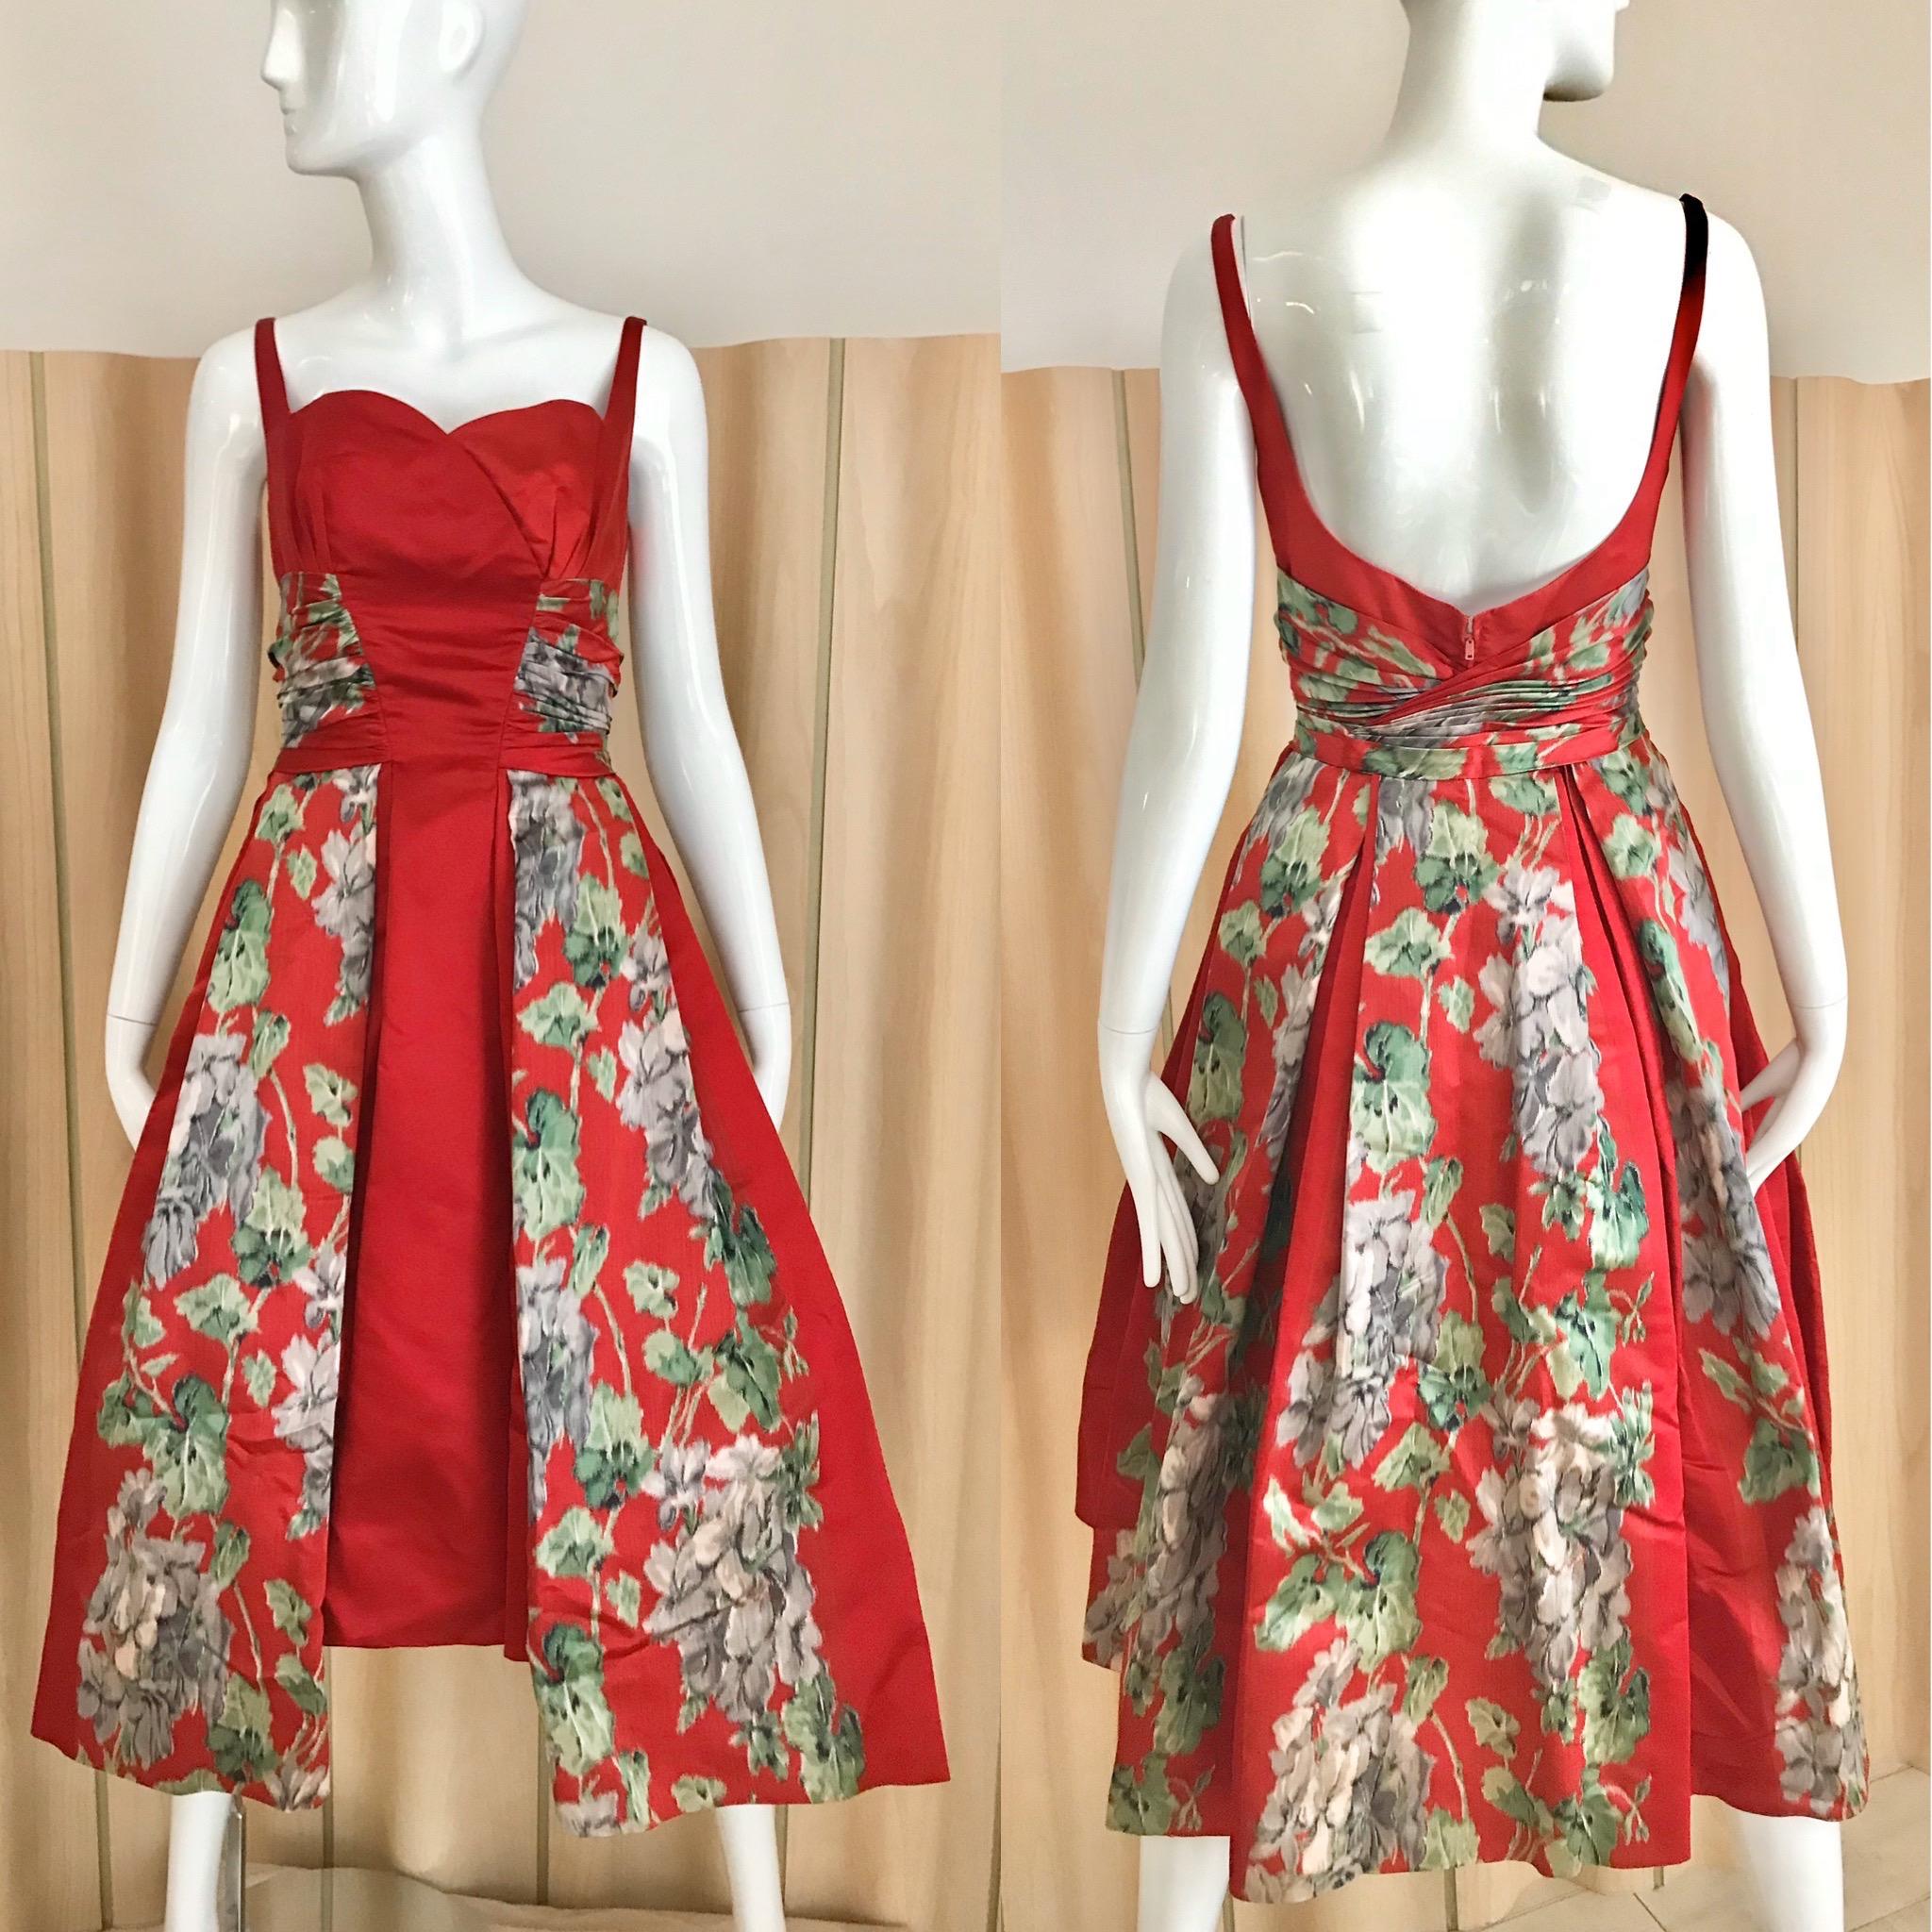 Stunning 1950s Red Silk Satin in green and grey floral print dress from Hattie Carnegie.
Spaghetti straps and fitted in the waist with low back.
Bust : 32”/ rib Cage 18”/ waist : 26”/ Dress length from strap to hem : 46” and there is an additional